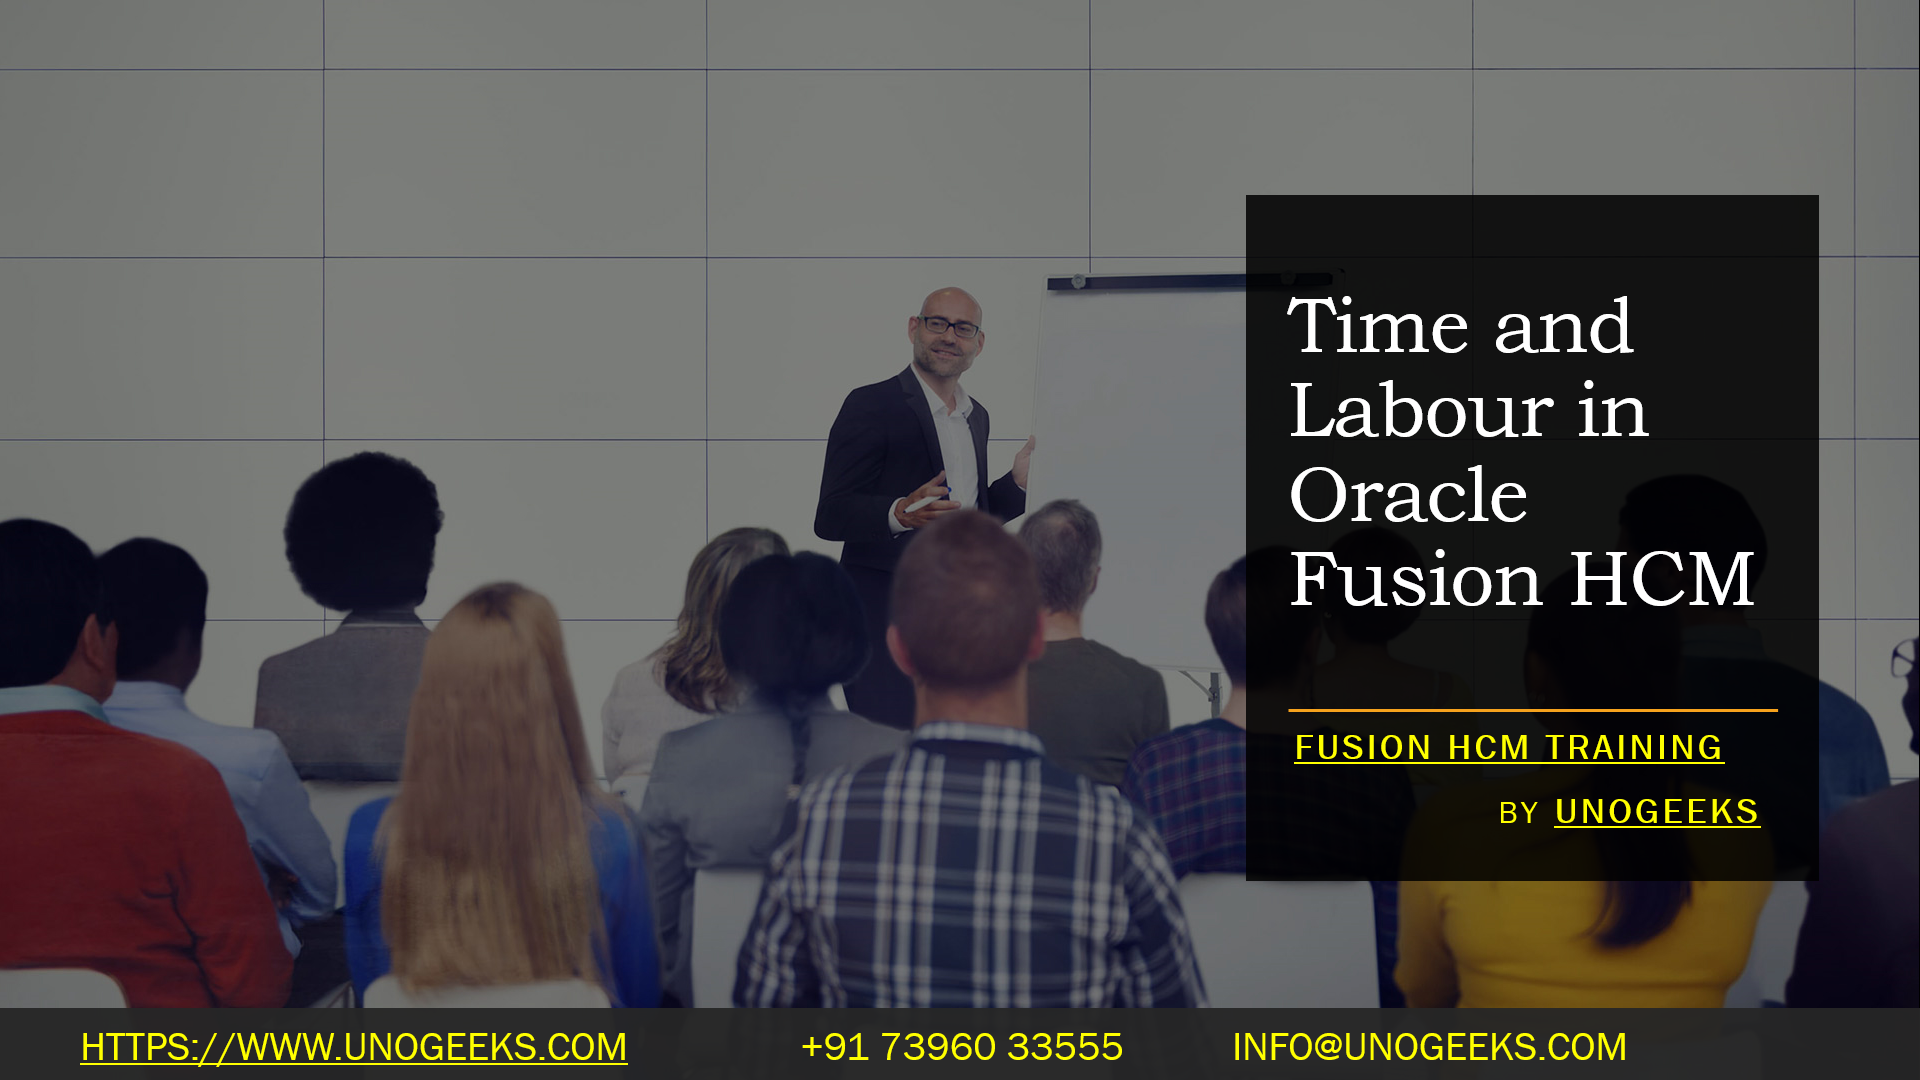 Time and Labour in Oracle Fusion HCM